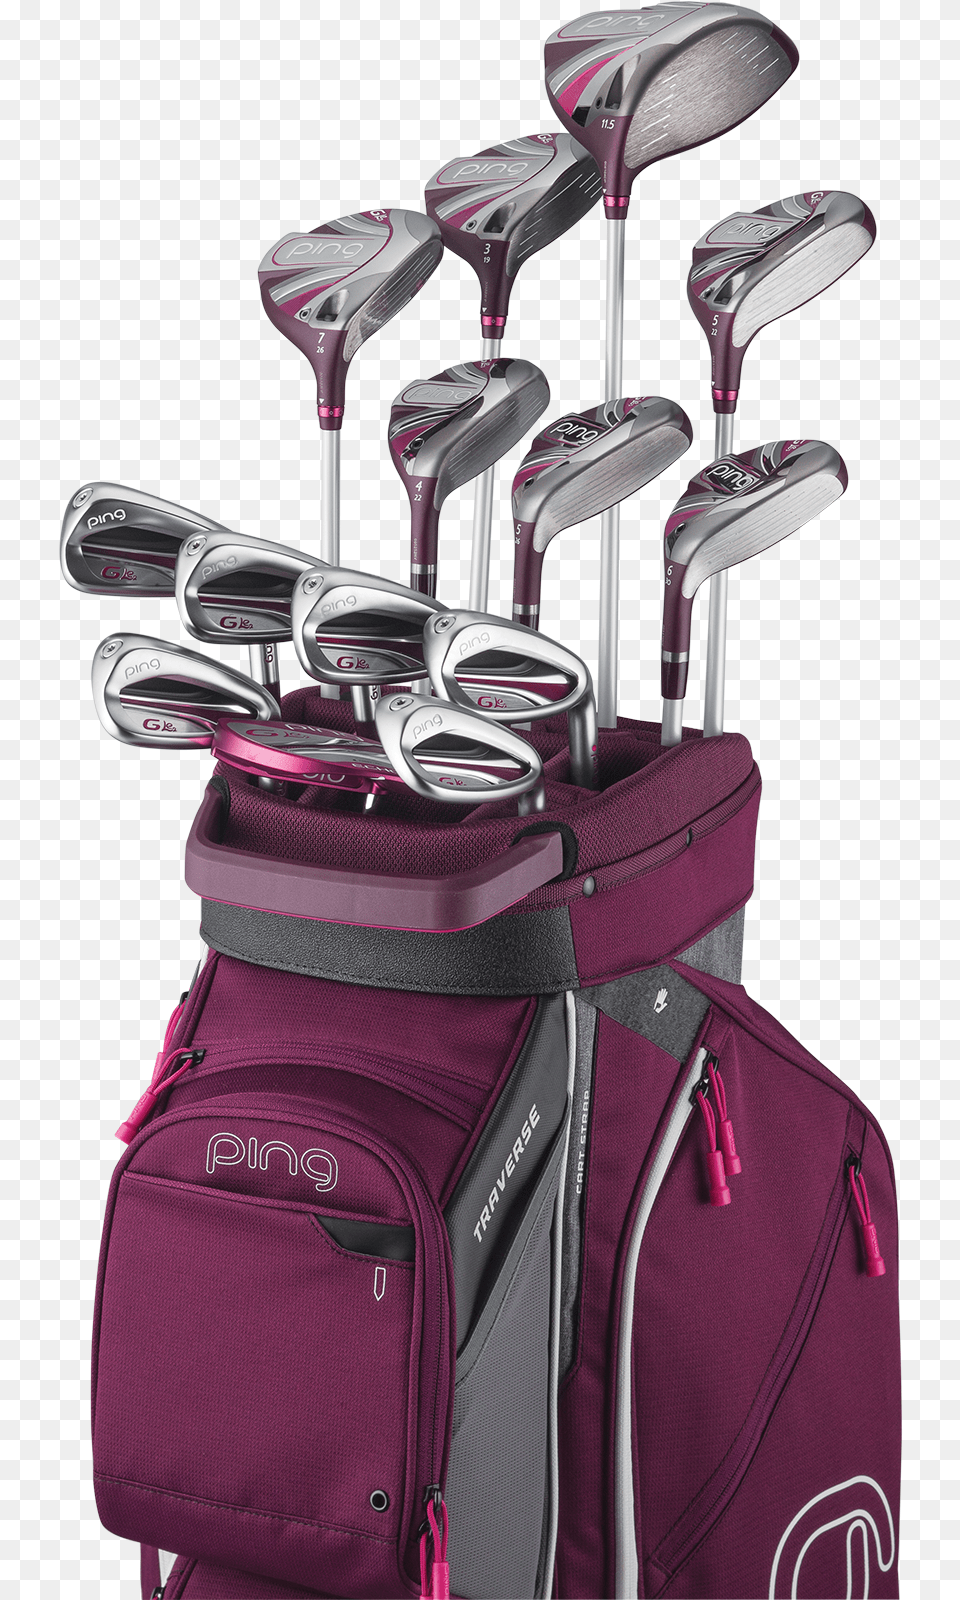 Ping Gle2 Close Up Bag Ping G Le 2 Bag, Golf, Golf Club, Sport, E-scooter Free Transparent Png